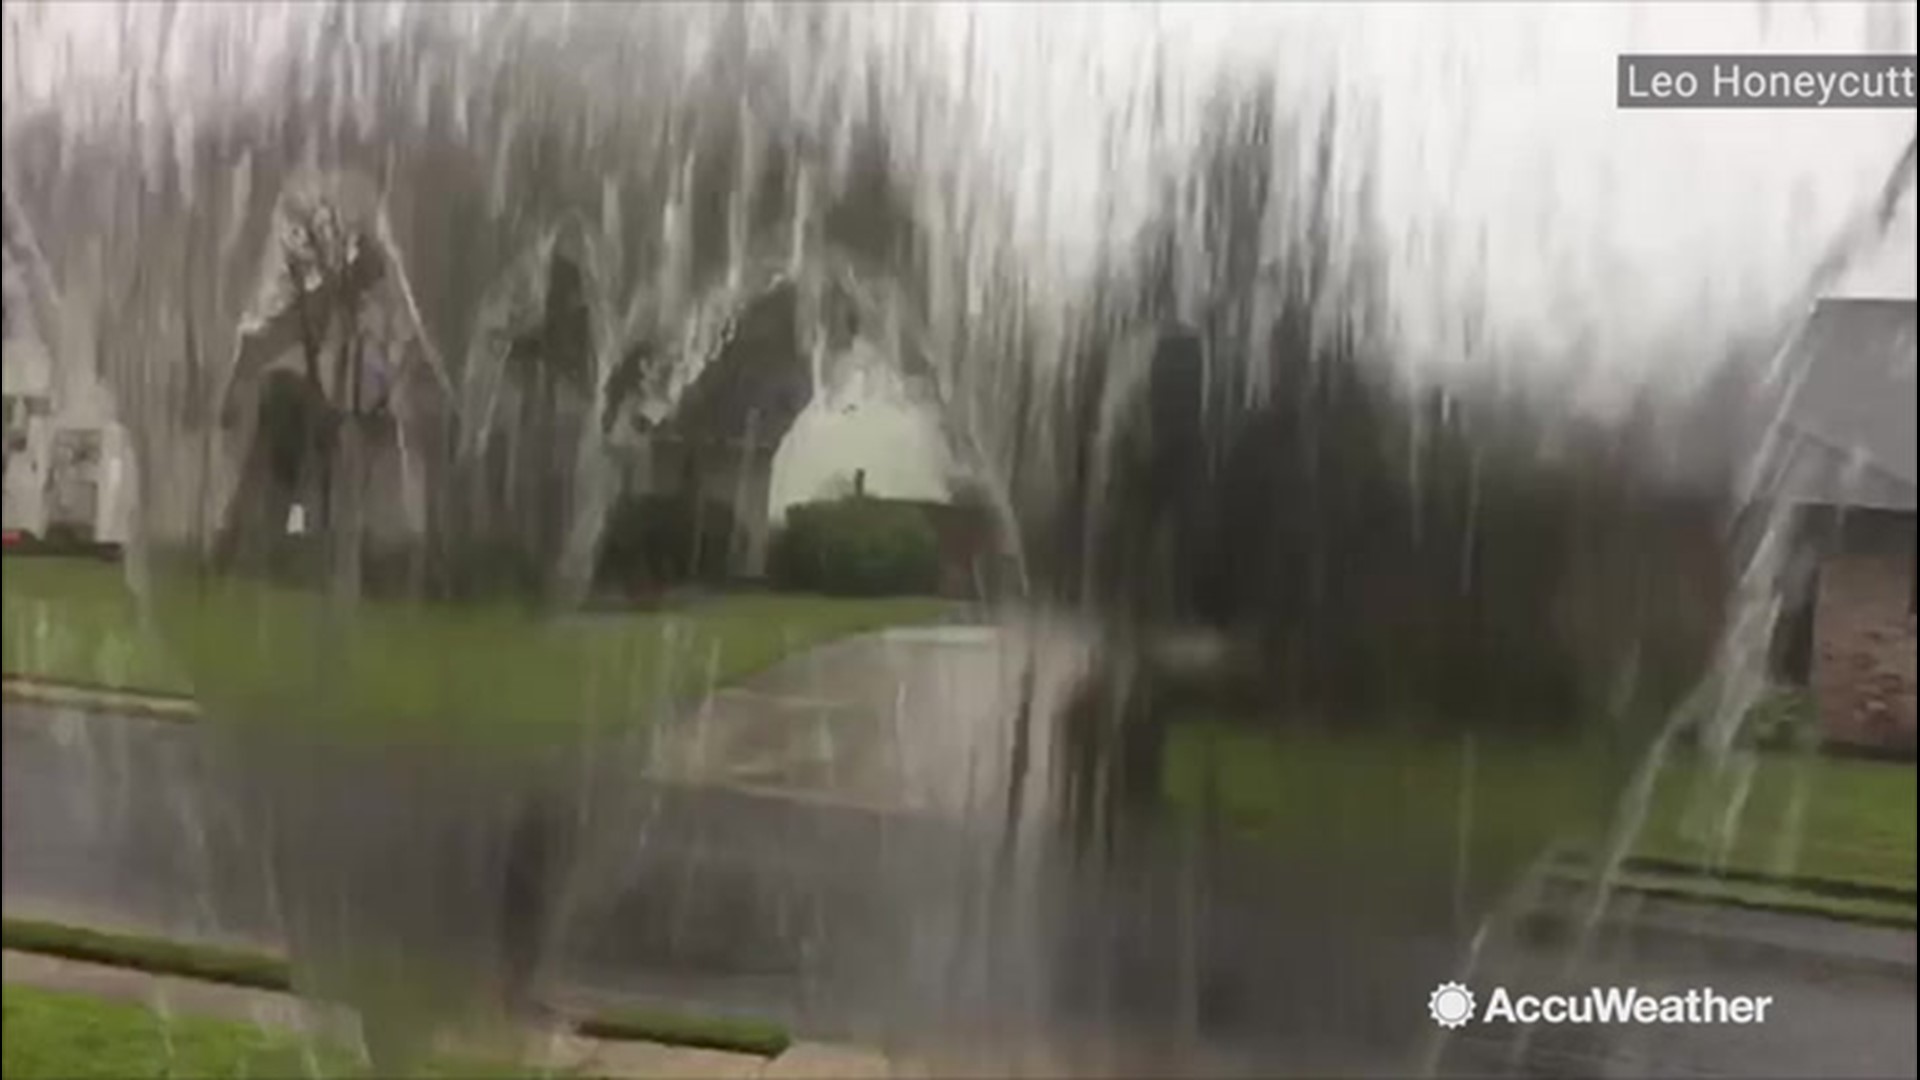 Rain comes down so hard in Baton Rouge, Louisiana, that it spills over the rain gutters on Oct. 21.